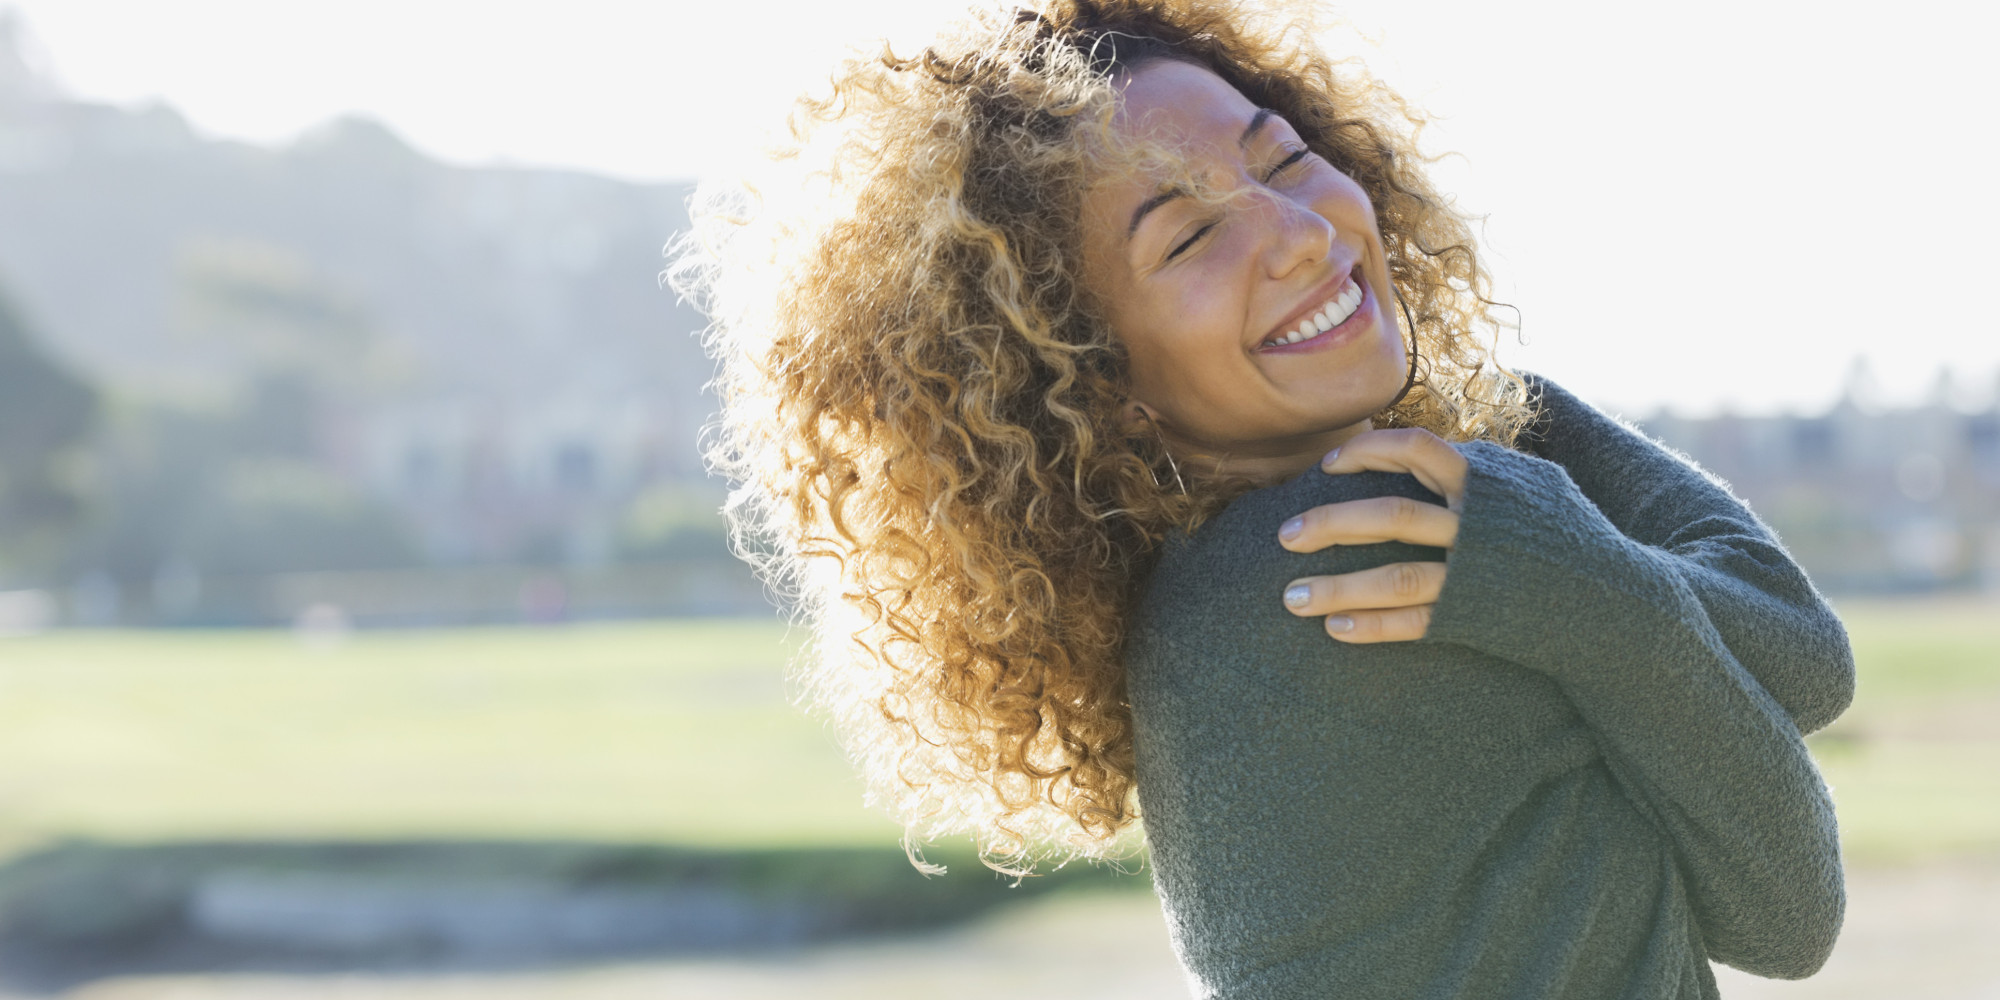 5 Truths In Having A Loving Relationship With Yourself | HuffPost